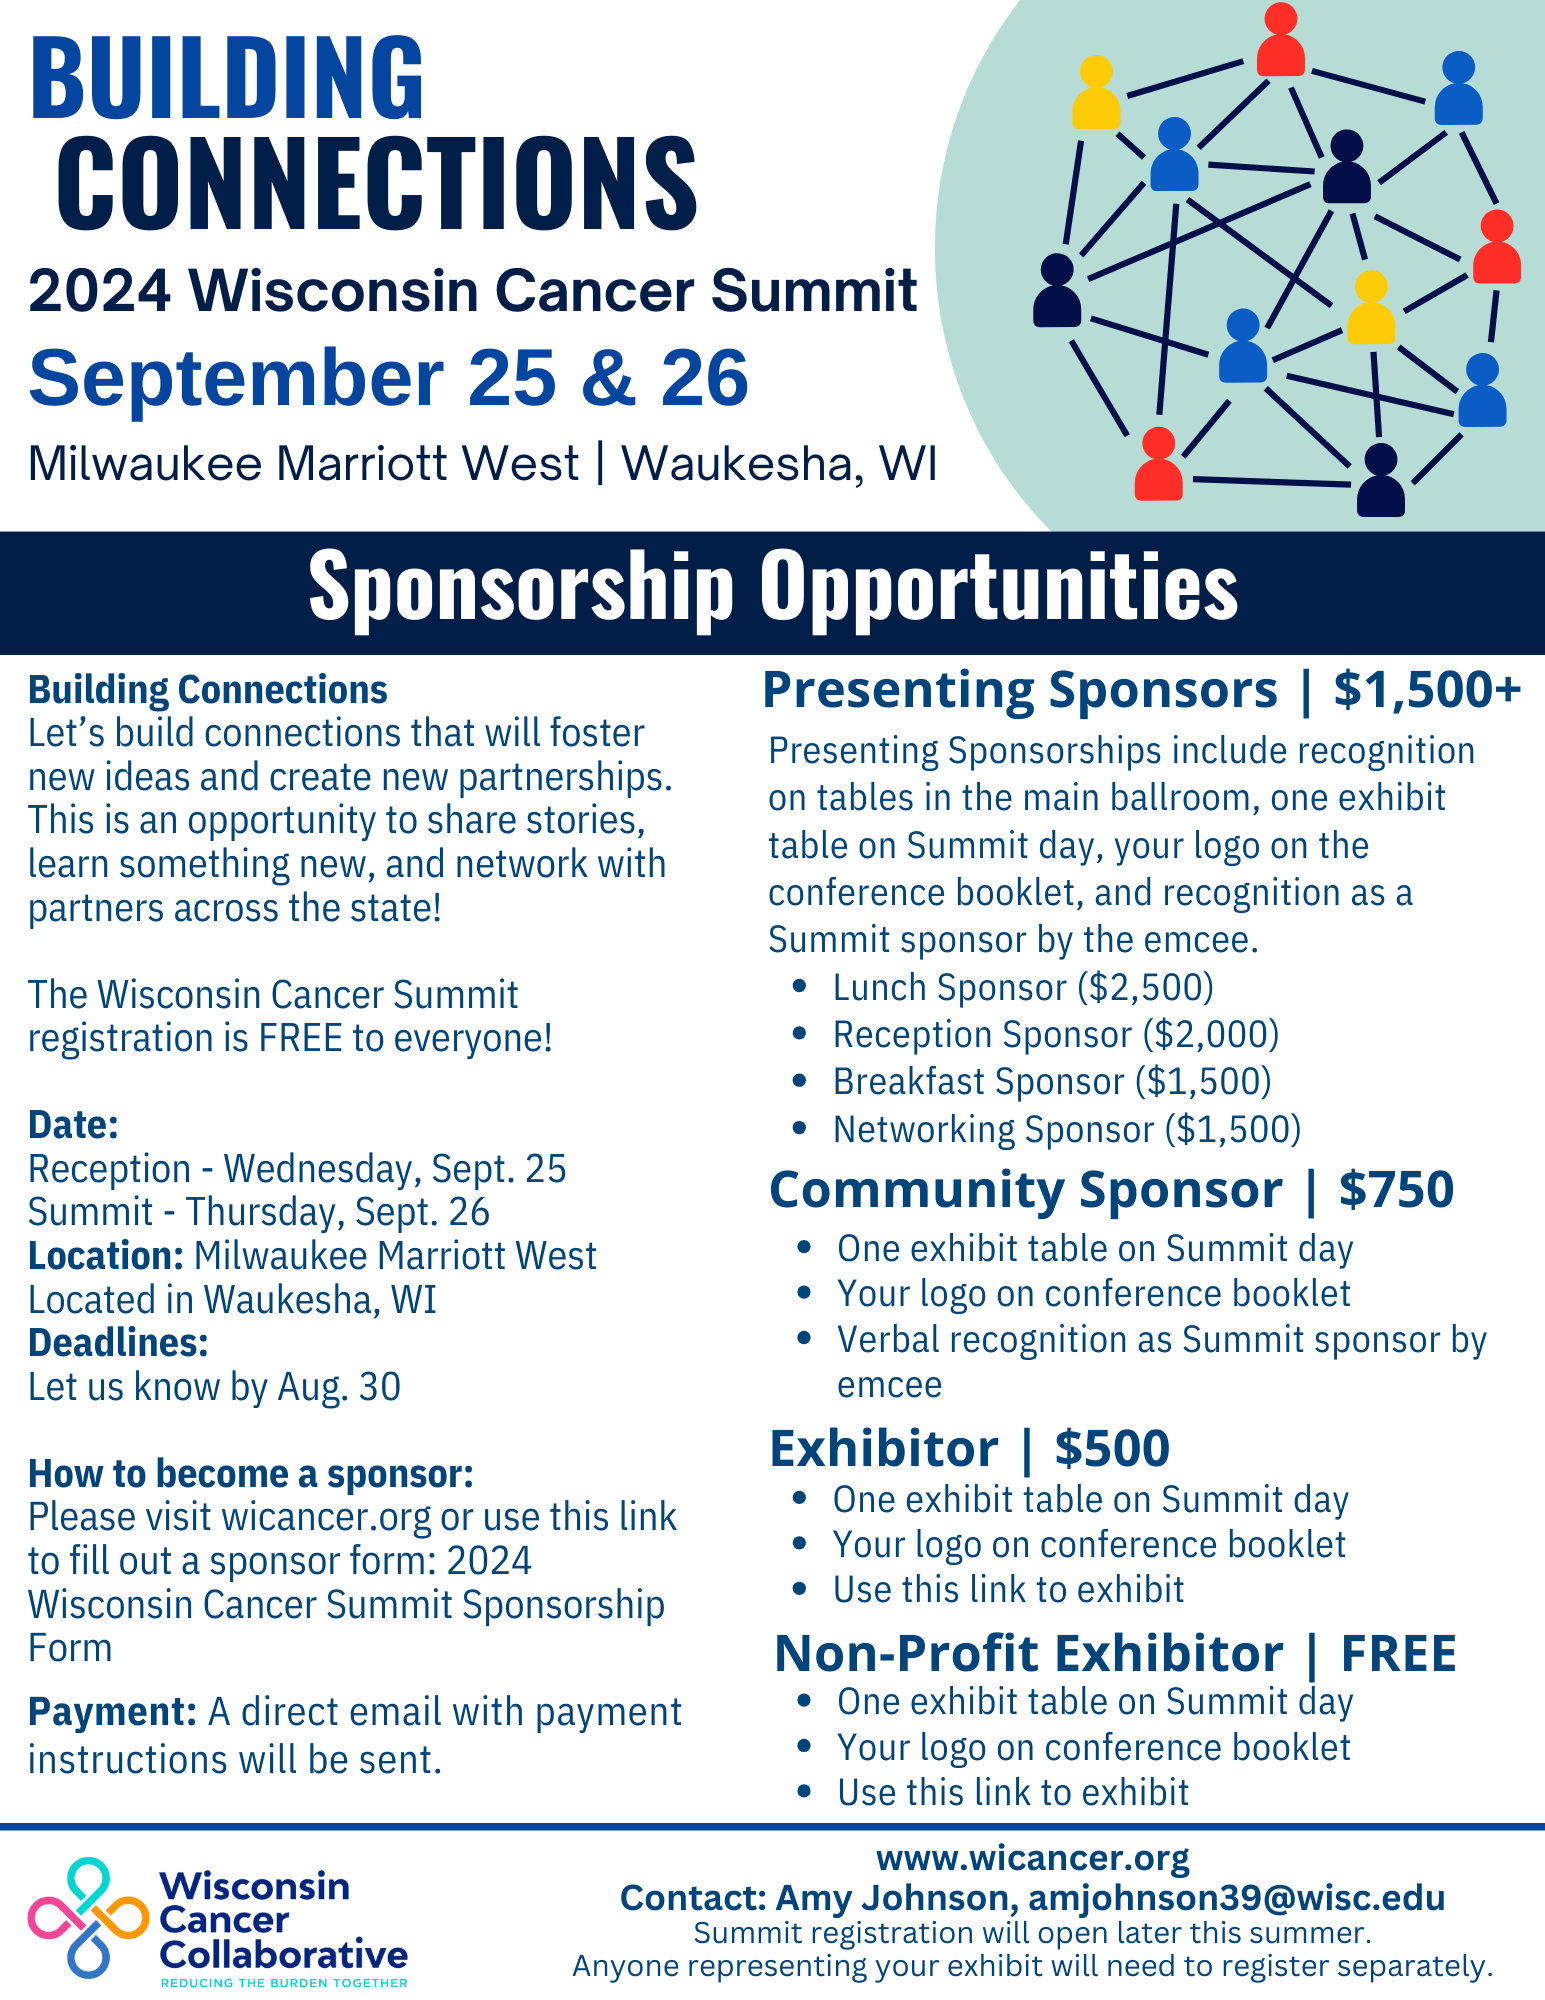 2024 Wisconsin Cancer Summit Sponsorship Form New